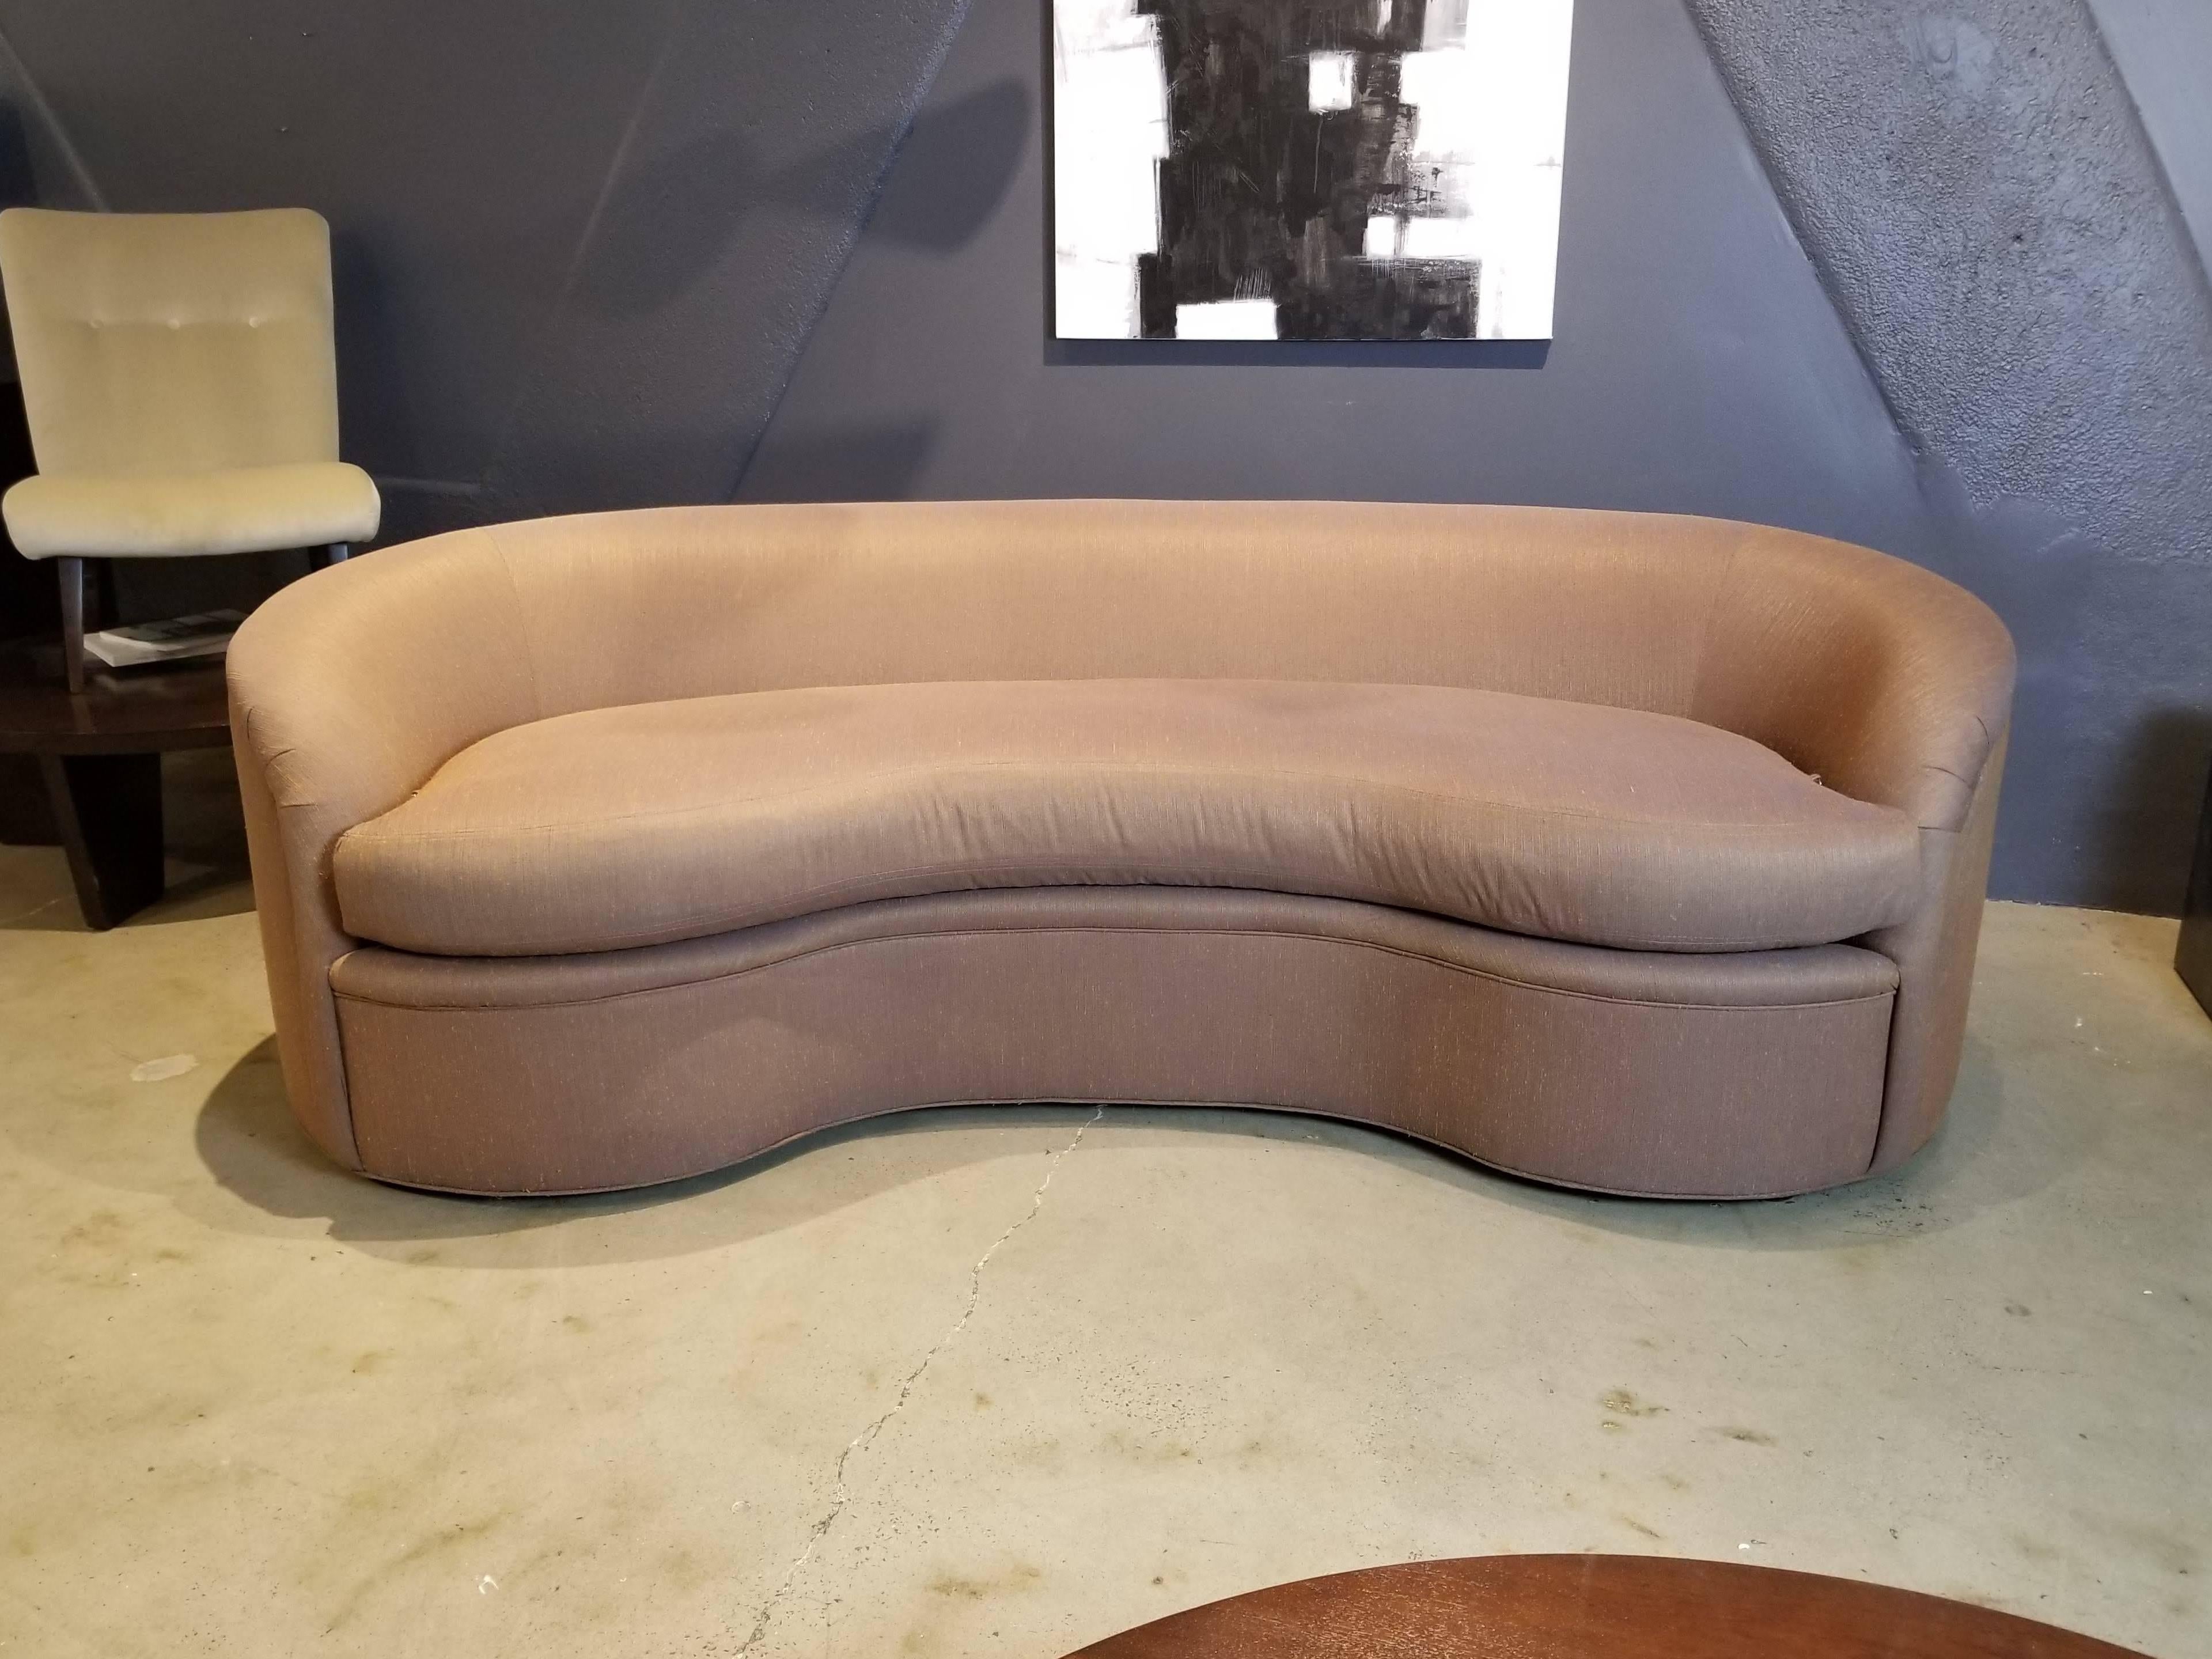 Classic biomorphic kidney bean shaped curved sofa made by Directional Furniture. Structurally in pristine, like-new condition. Currently upholstered in a deep rosy beige silk shantung that is in very good condition with a few minor light surface